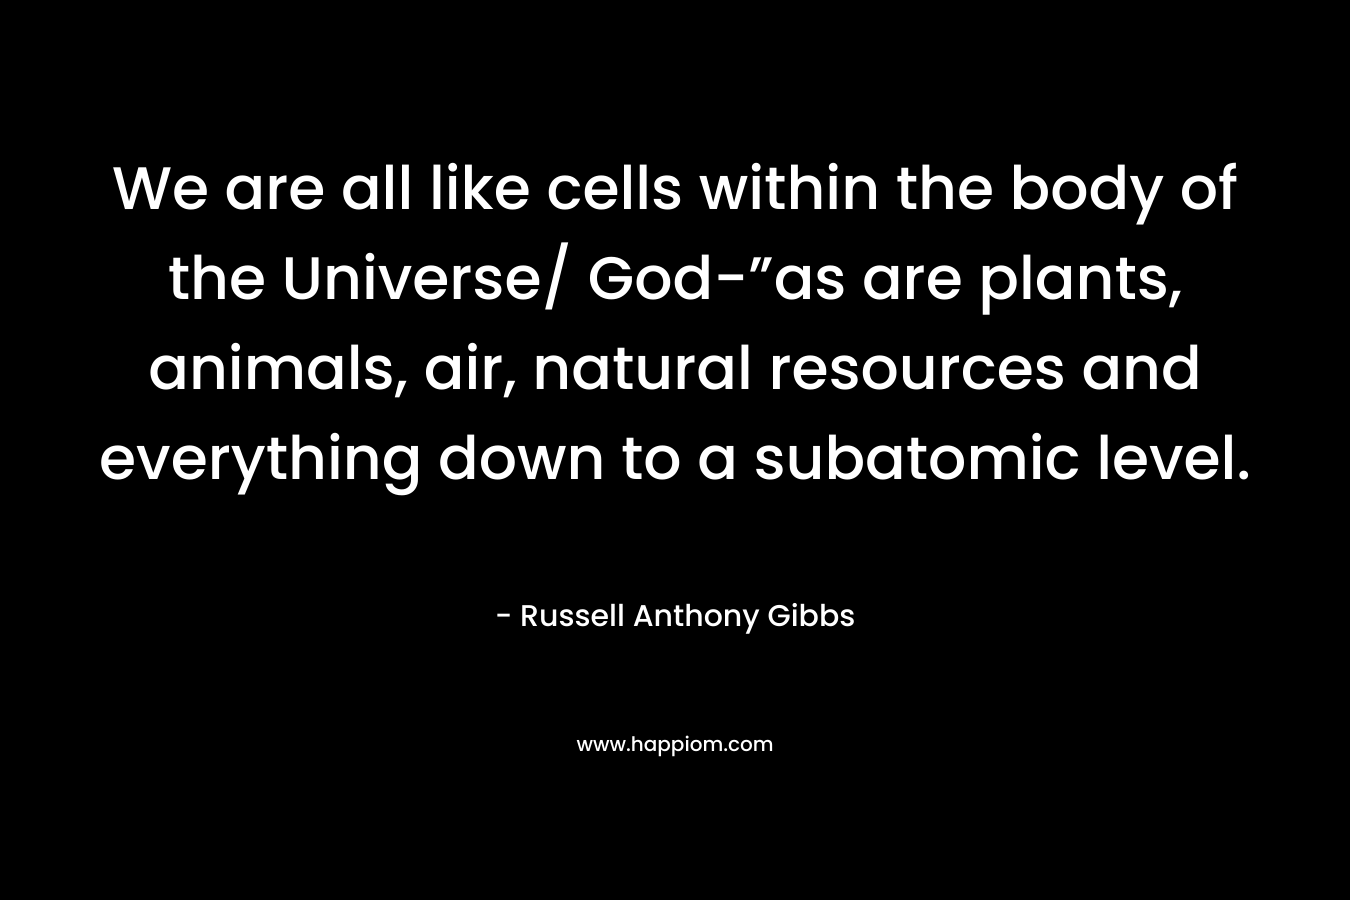 We are all like cells within the body of the Universe/ God-”as are plants, animals, air, natural resources and everything down to a subatomic level.